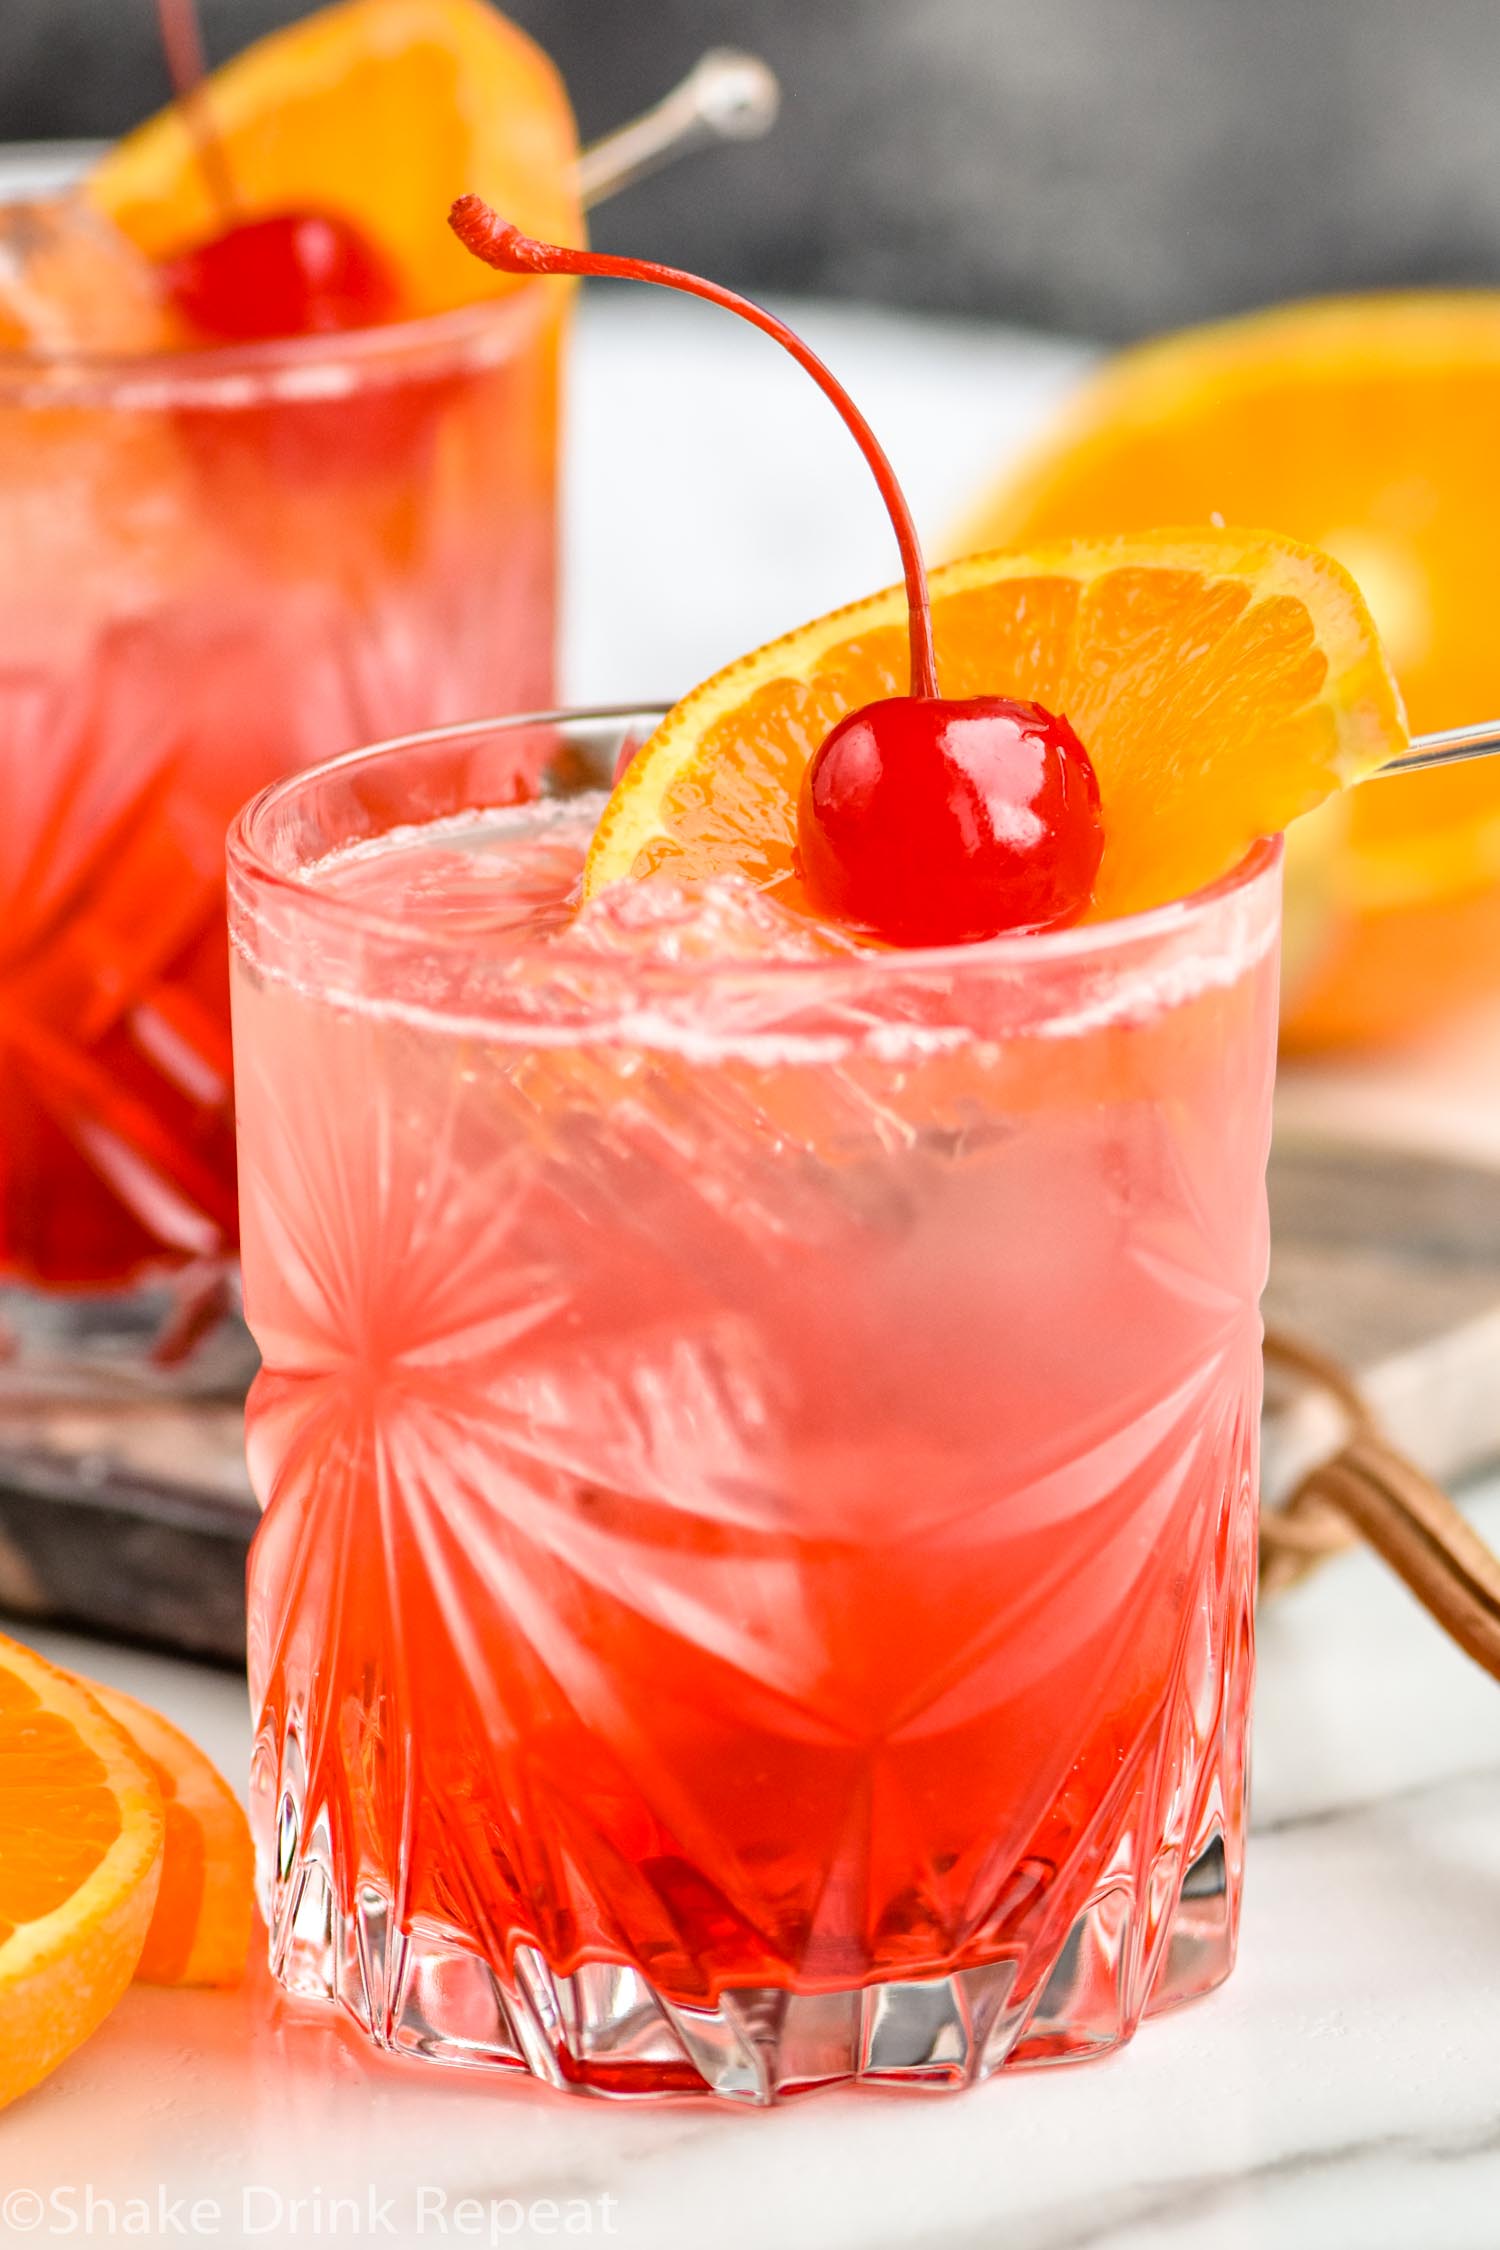 two glasses of cherry vodka sour with ice, orange slice and cherry garnish